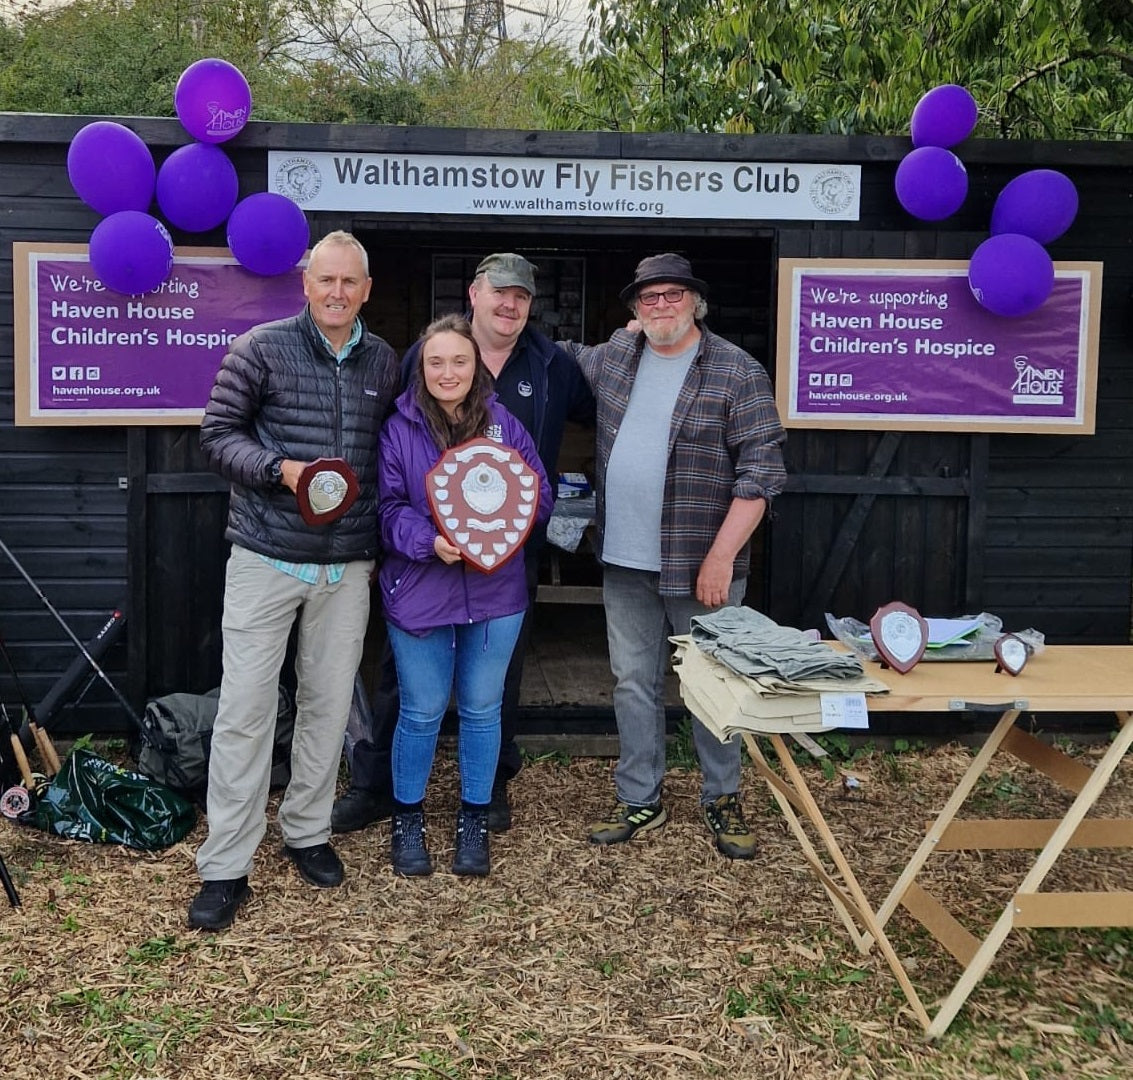 Walthamstow Fly Fishers and Haven House Children's Hospice